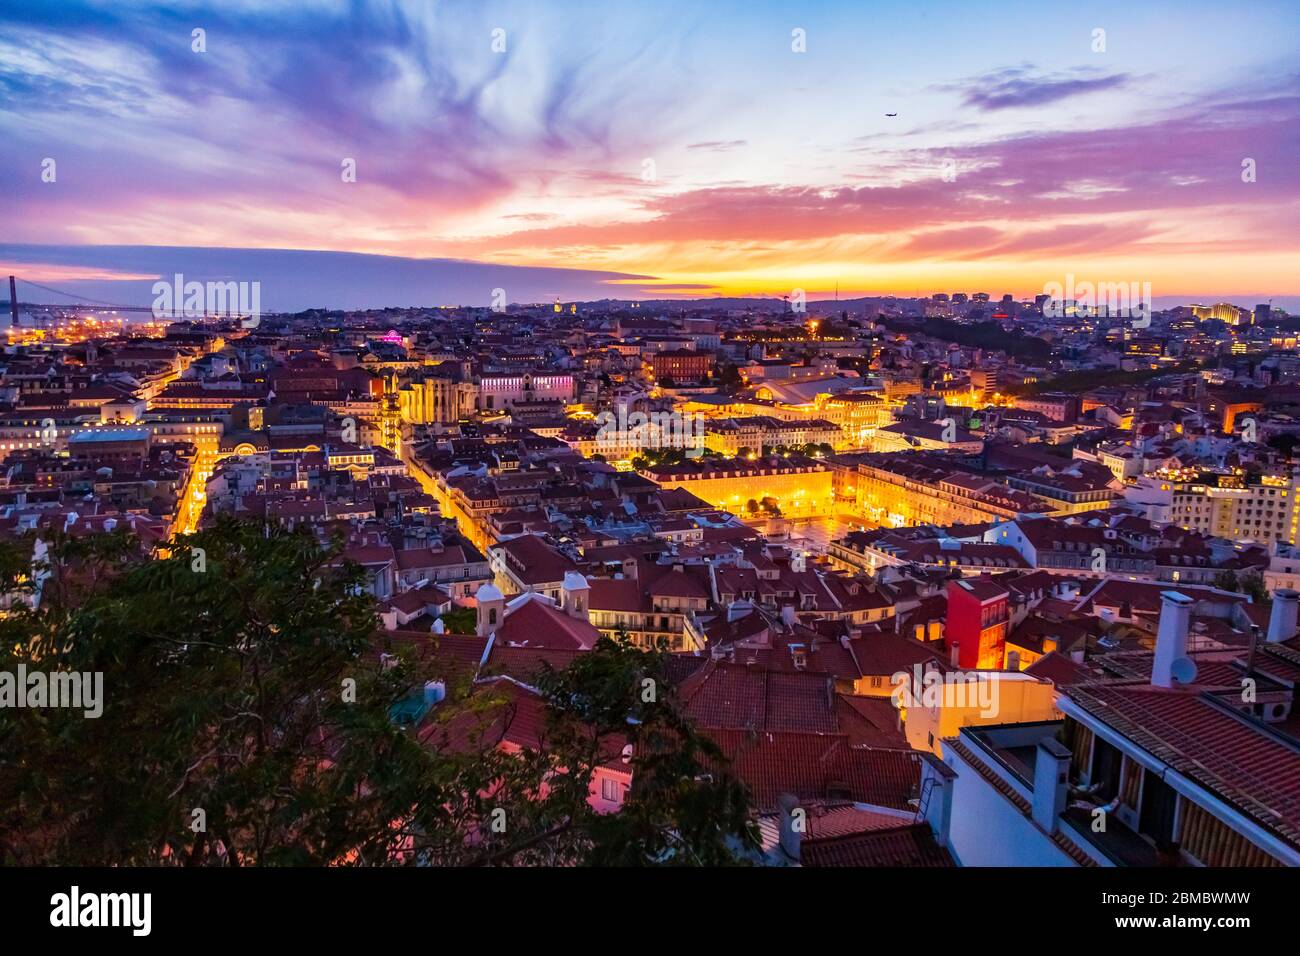 Beautiful panorama of old town and Baixa district in Lisbon city at evening, seen from Sao Jorge Castle hill, Portugal Stock Photo